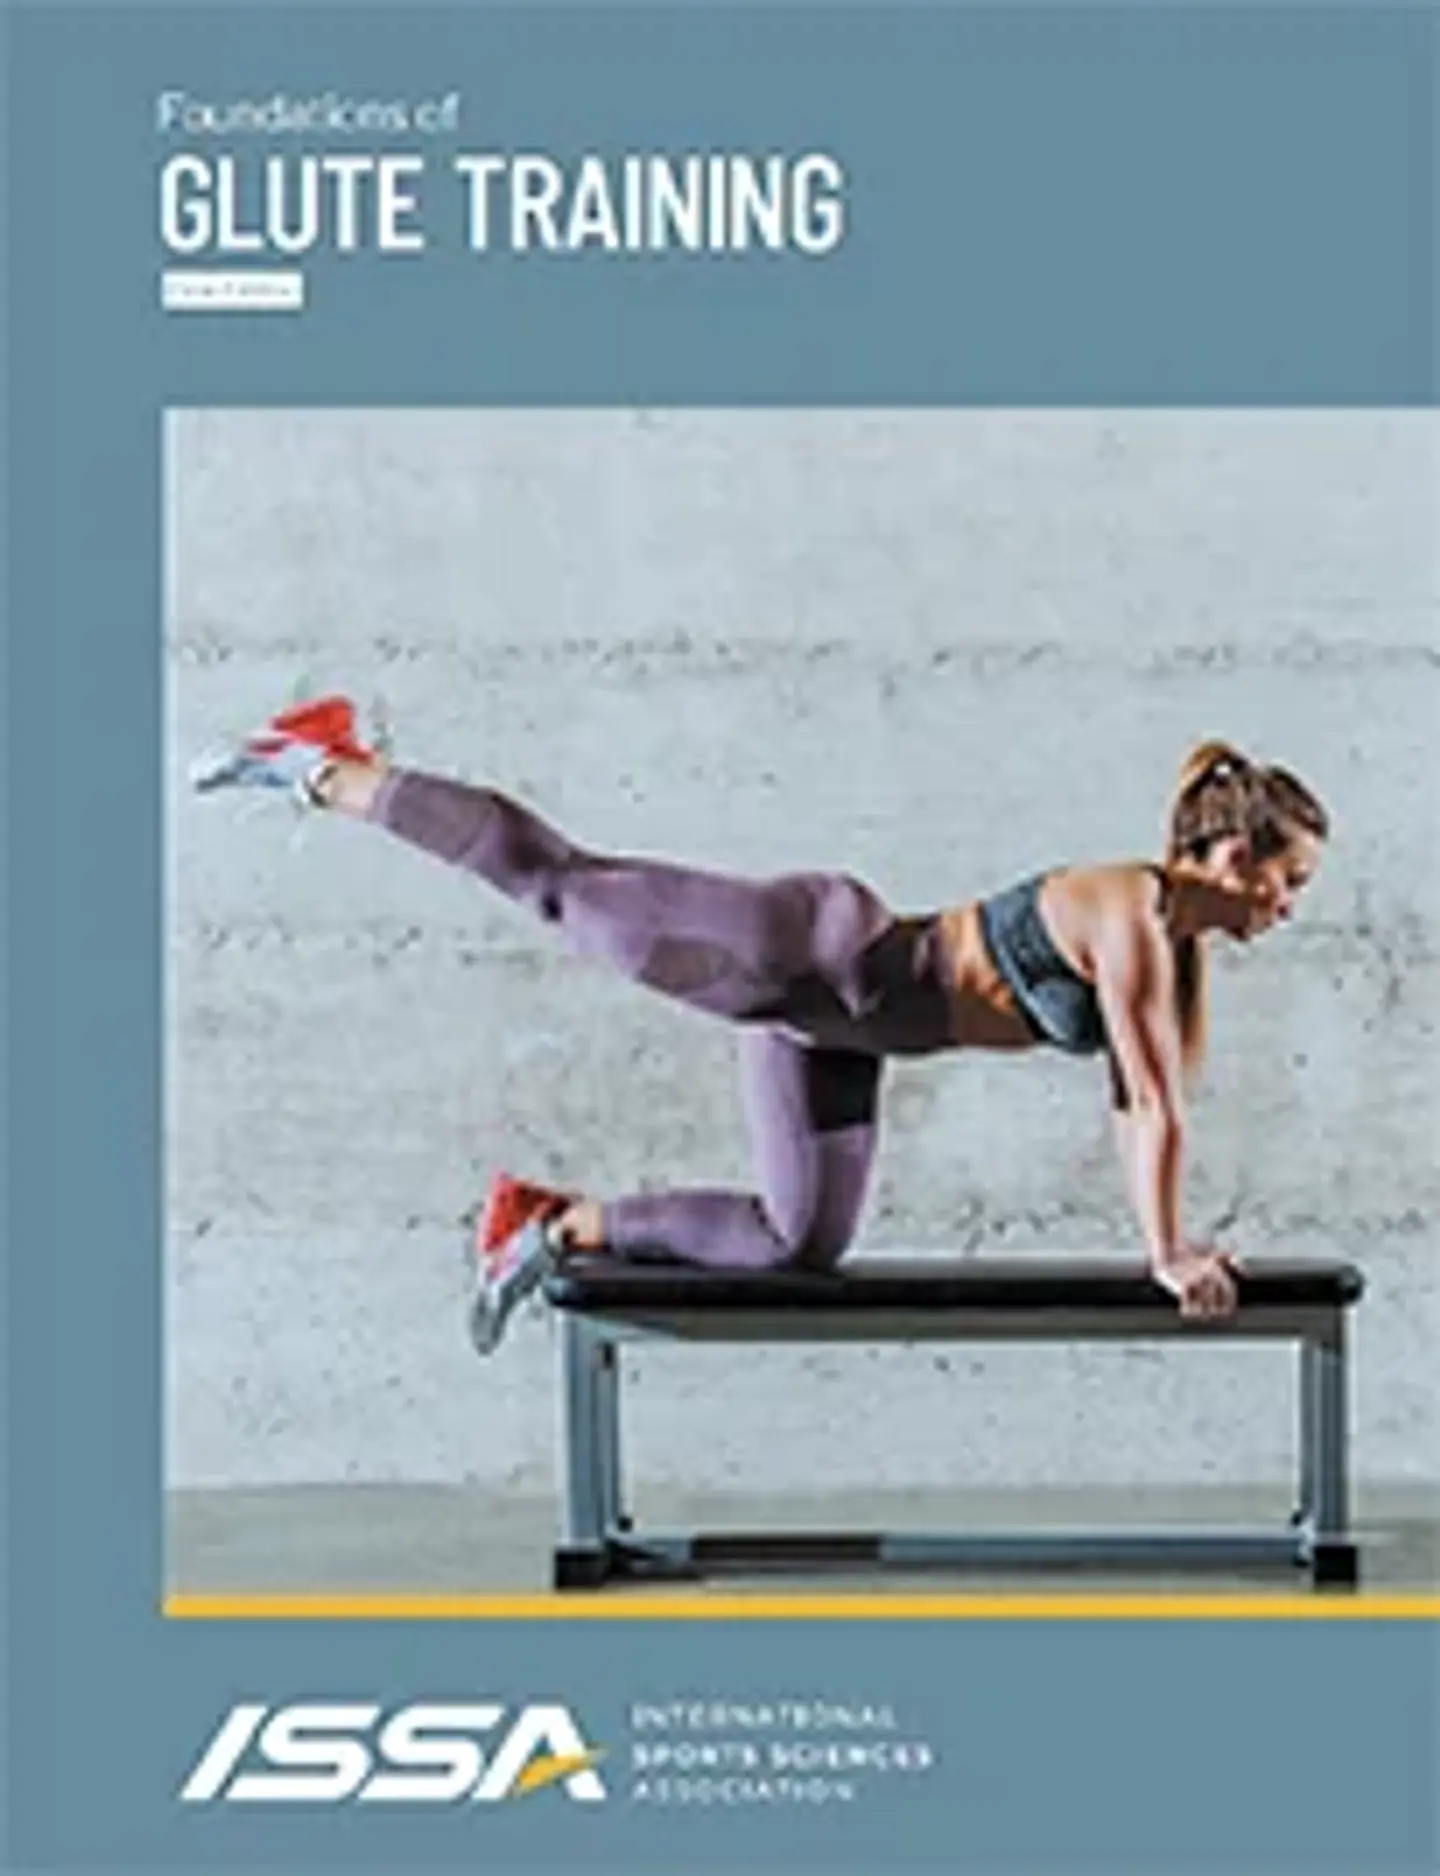 Glute Training Specialist Course Guide